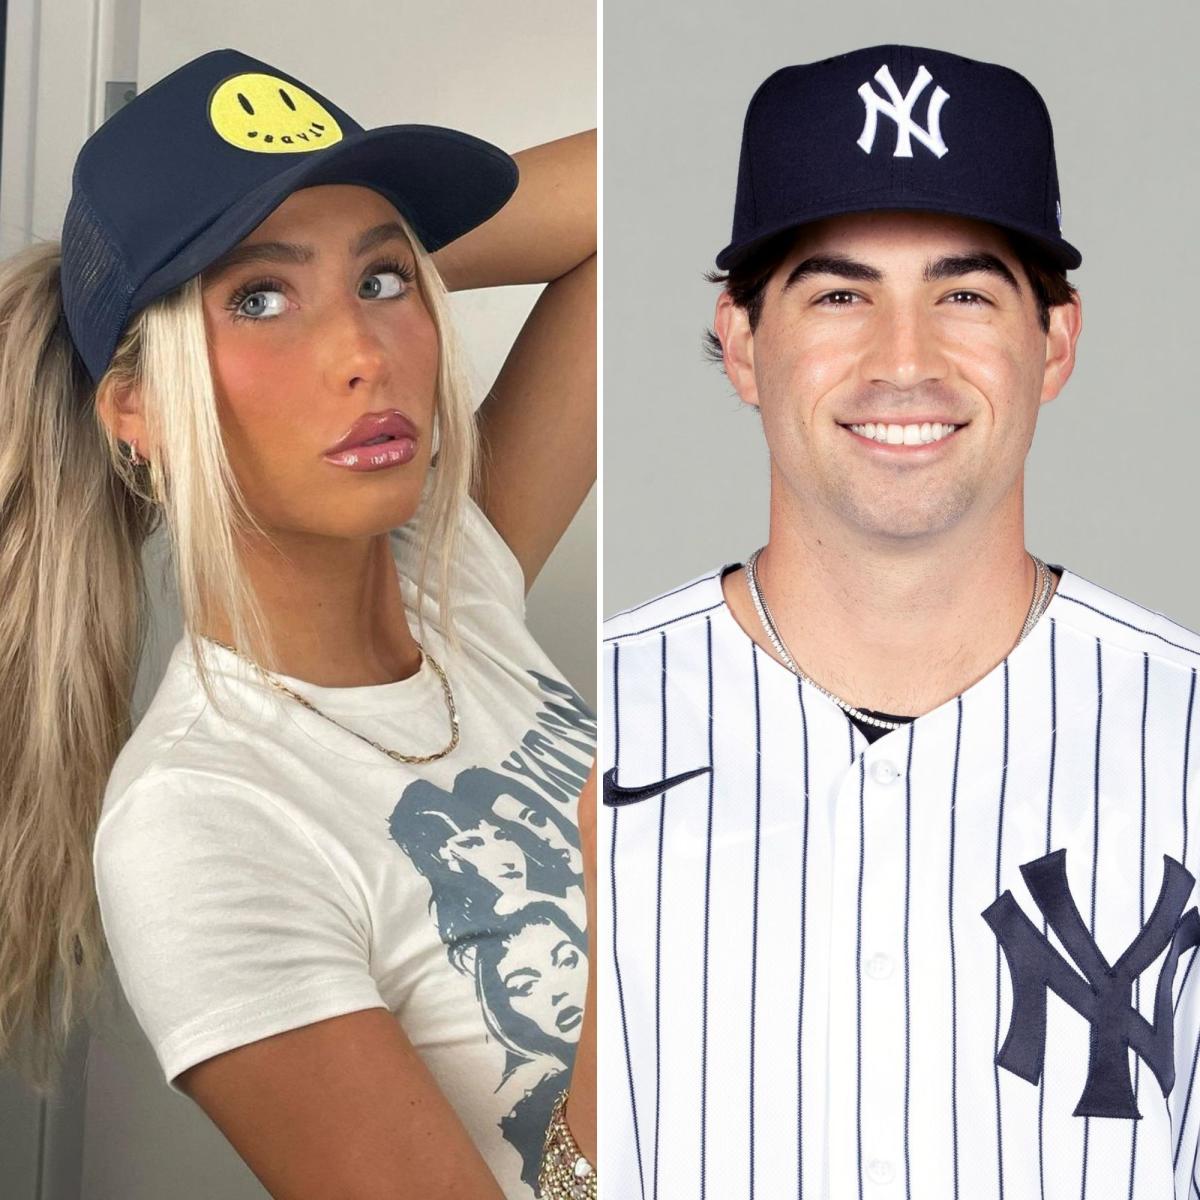 What Happened Between TikTok Star Alix Earle and MLB's Tyler Wade?  Relationship and Split Details